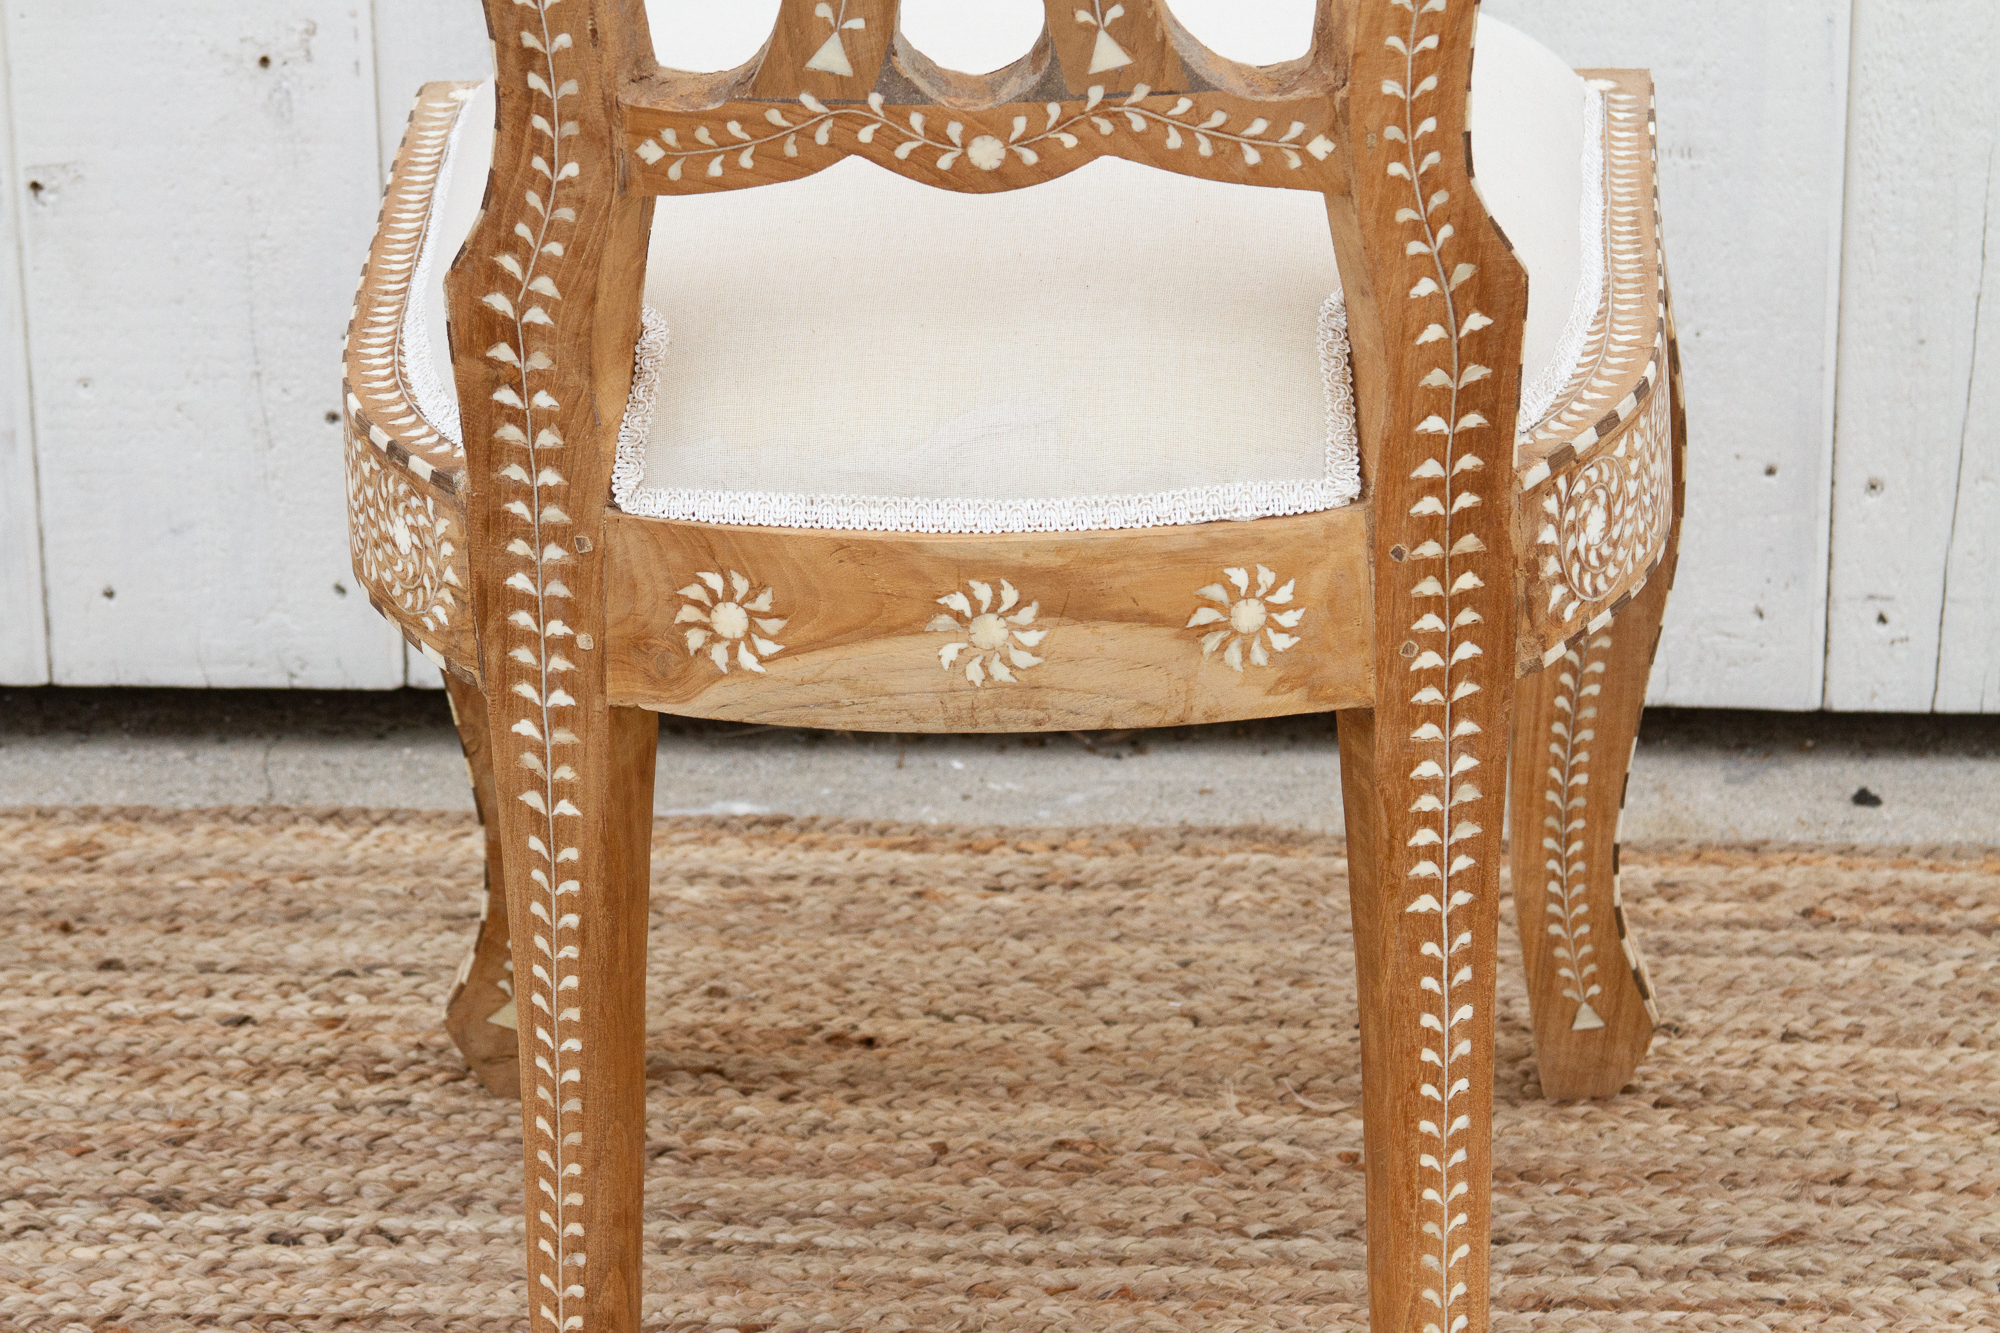 Pair of Royal Indian Inlaid Dining Chair~P77685053